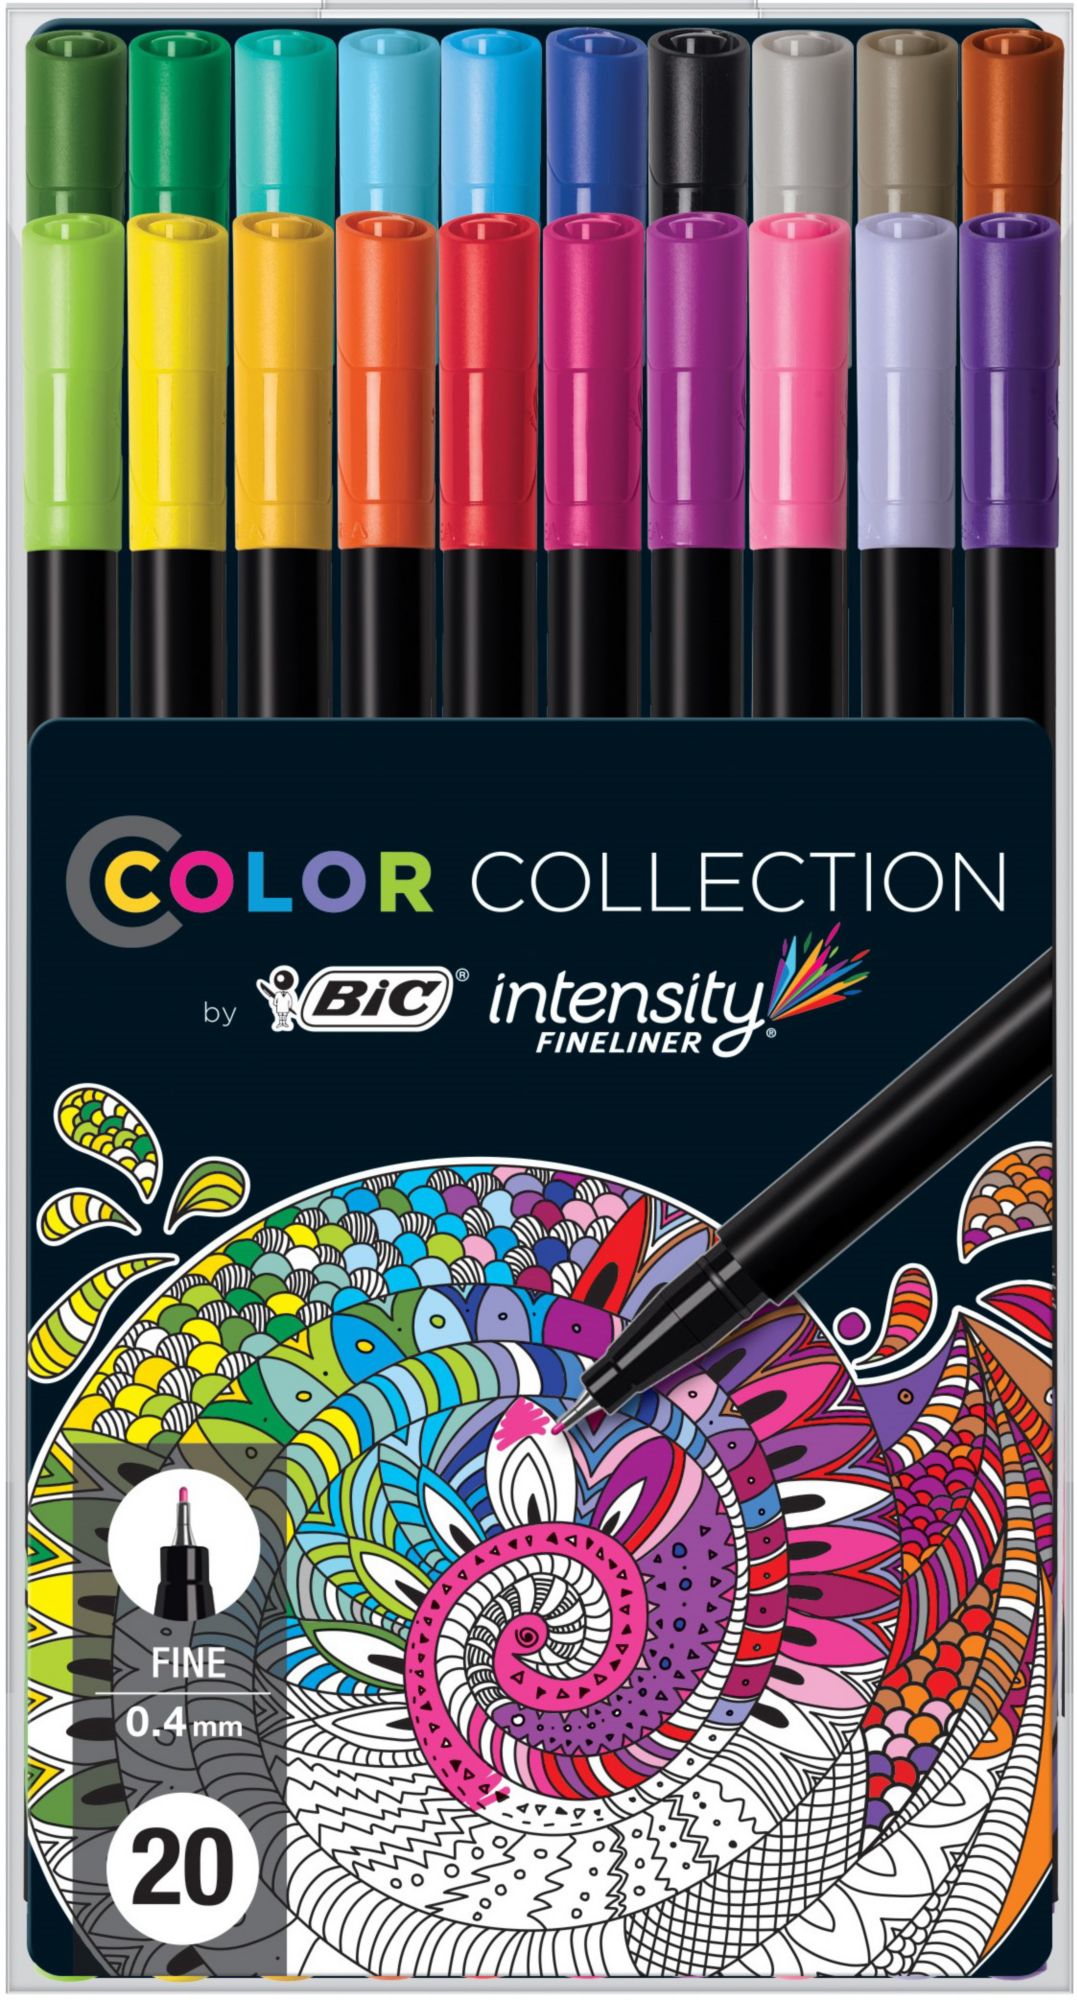 BIC Intensity Fineliner Color Collection Pens, 20 pk.